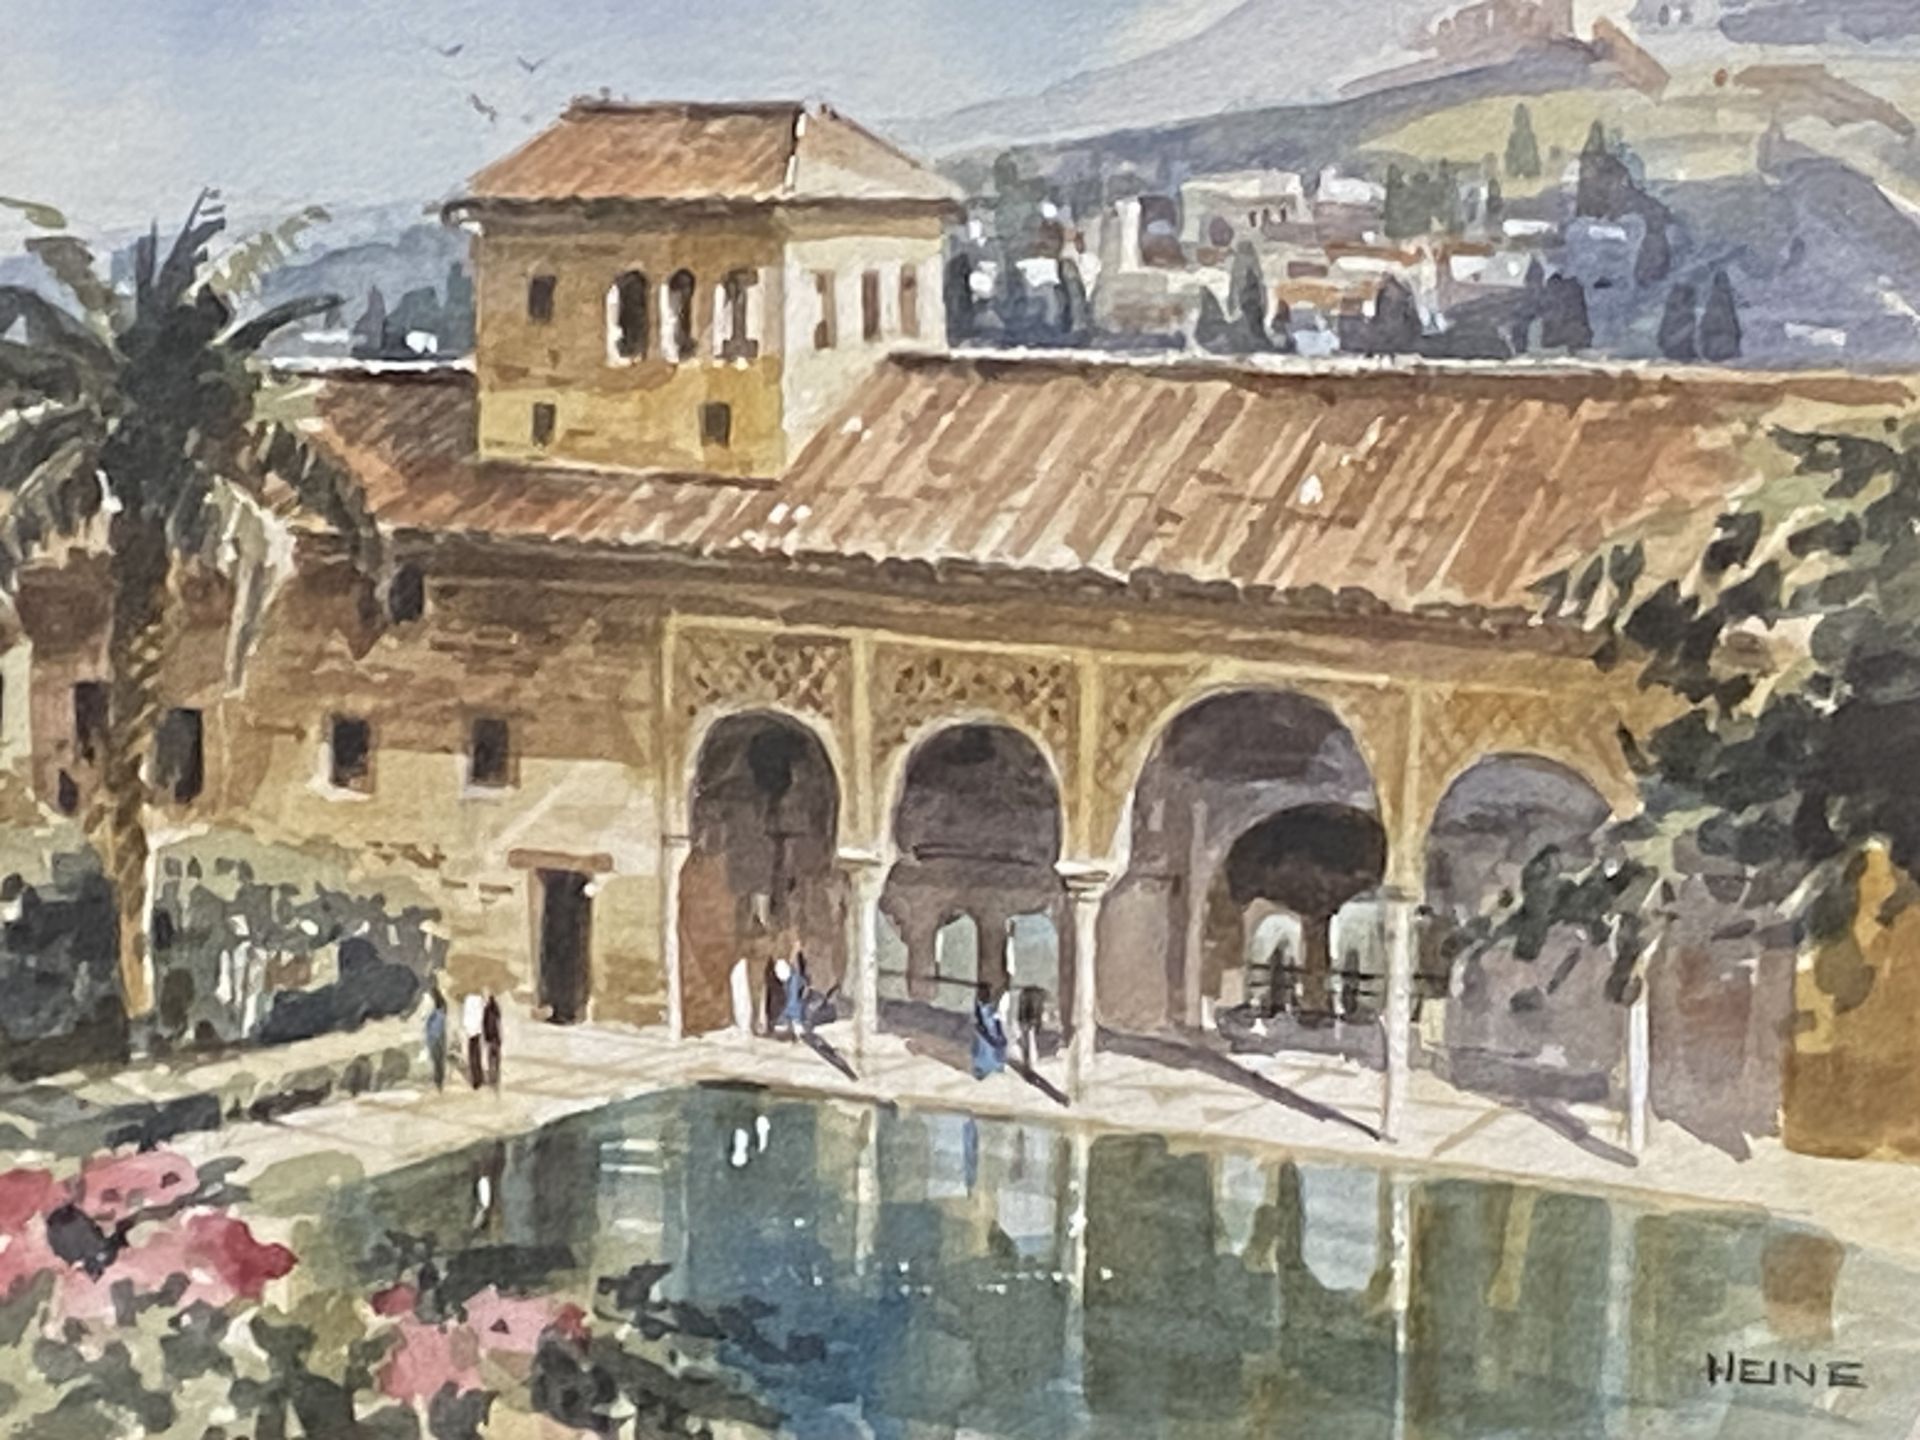 Framed and glazed watercolour of the Lady's Tower in Alhambra - Bild 3 aus 3